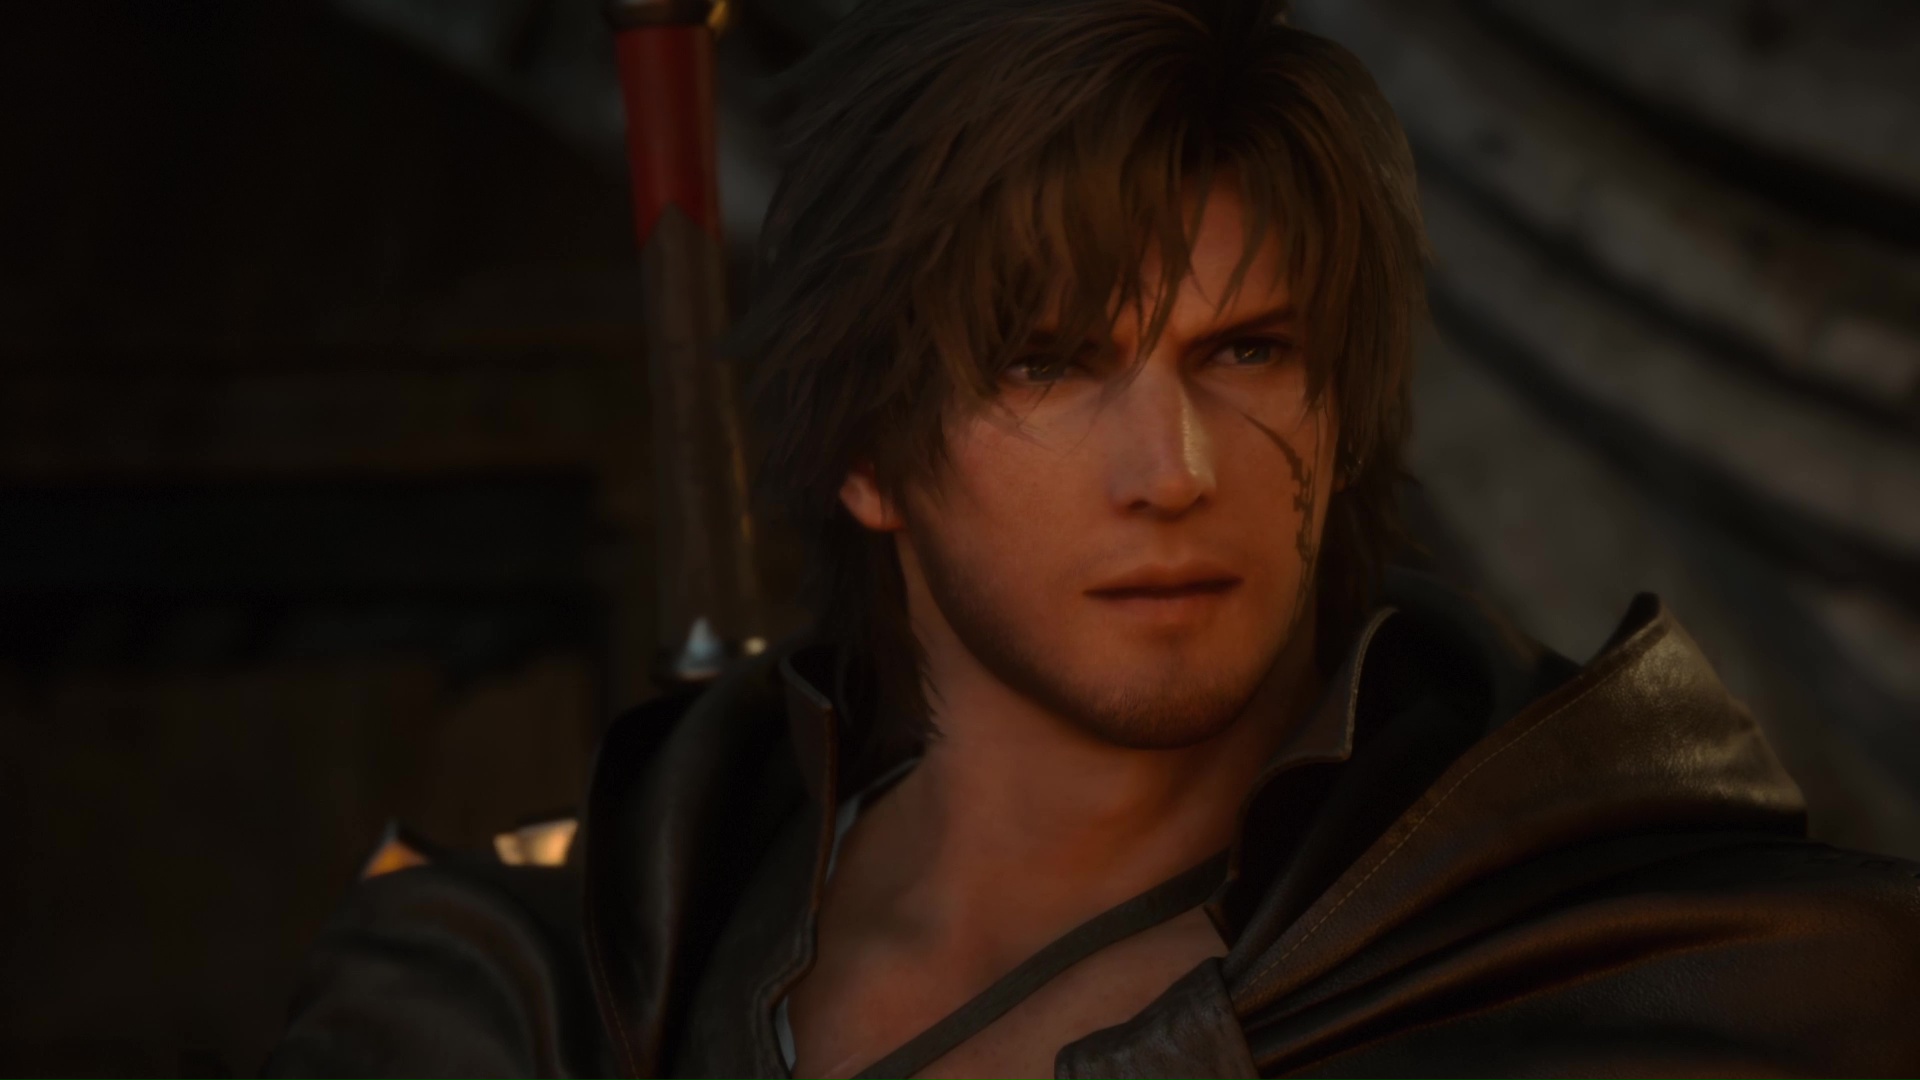 Looks like we're getting a new Final Fantasy 16 trailer next month